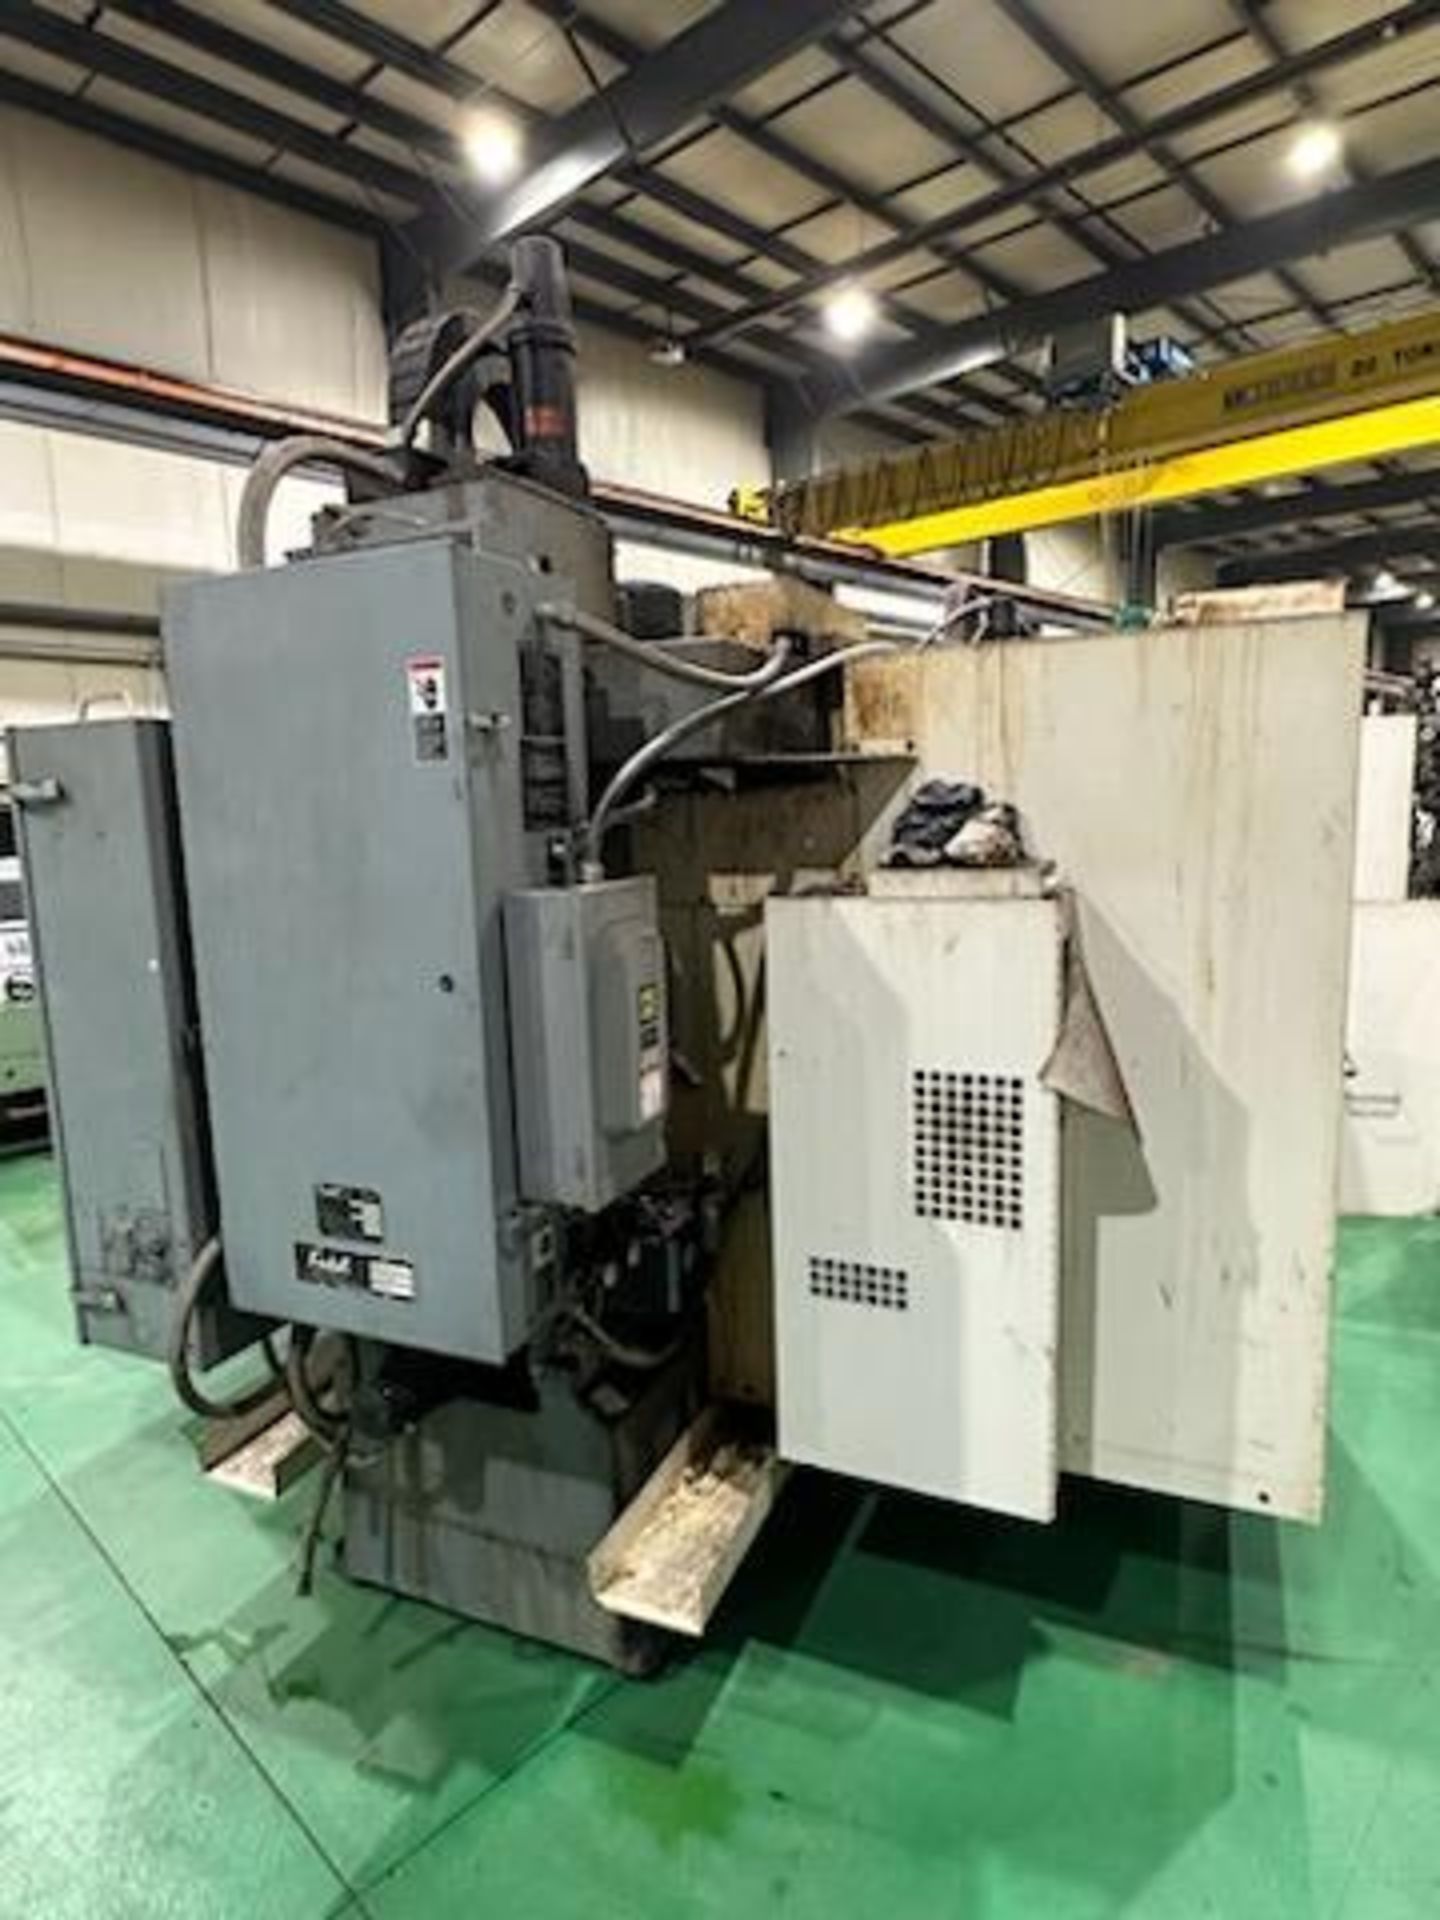 1995 FADAL 4020 CNC VERTICAL MACHINING CENTER - Image 7 of 9